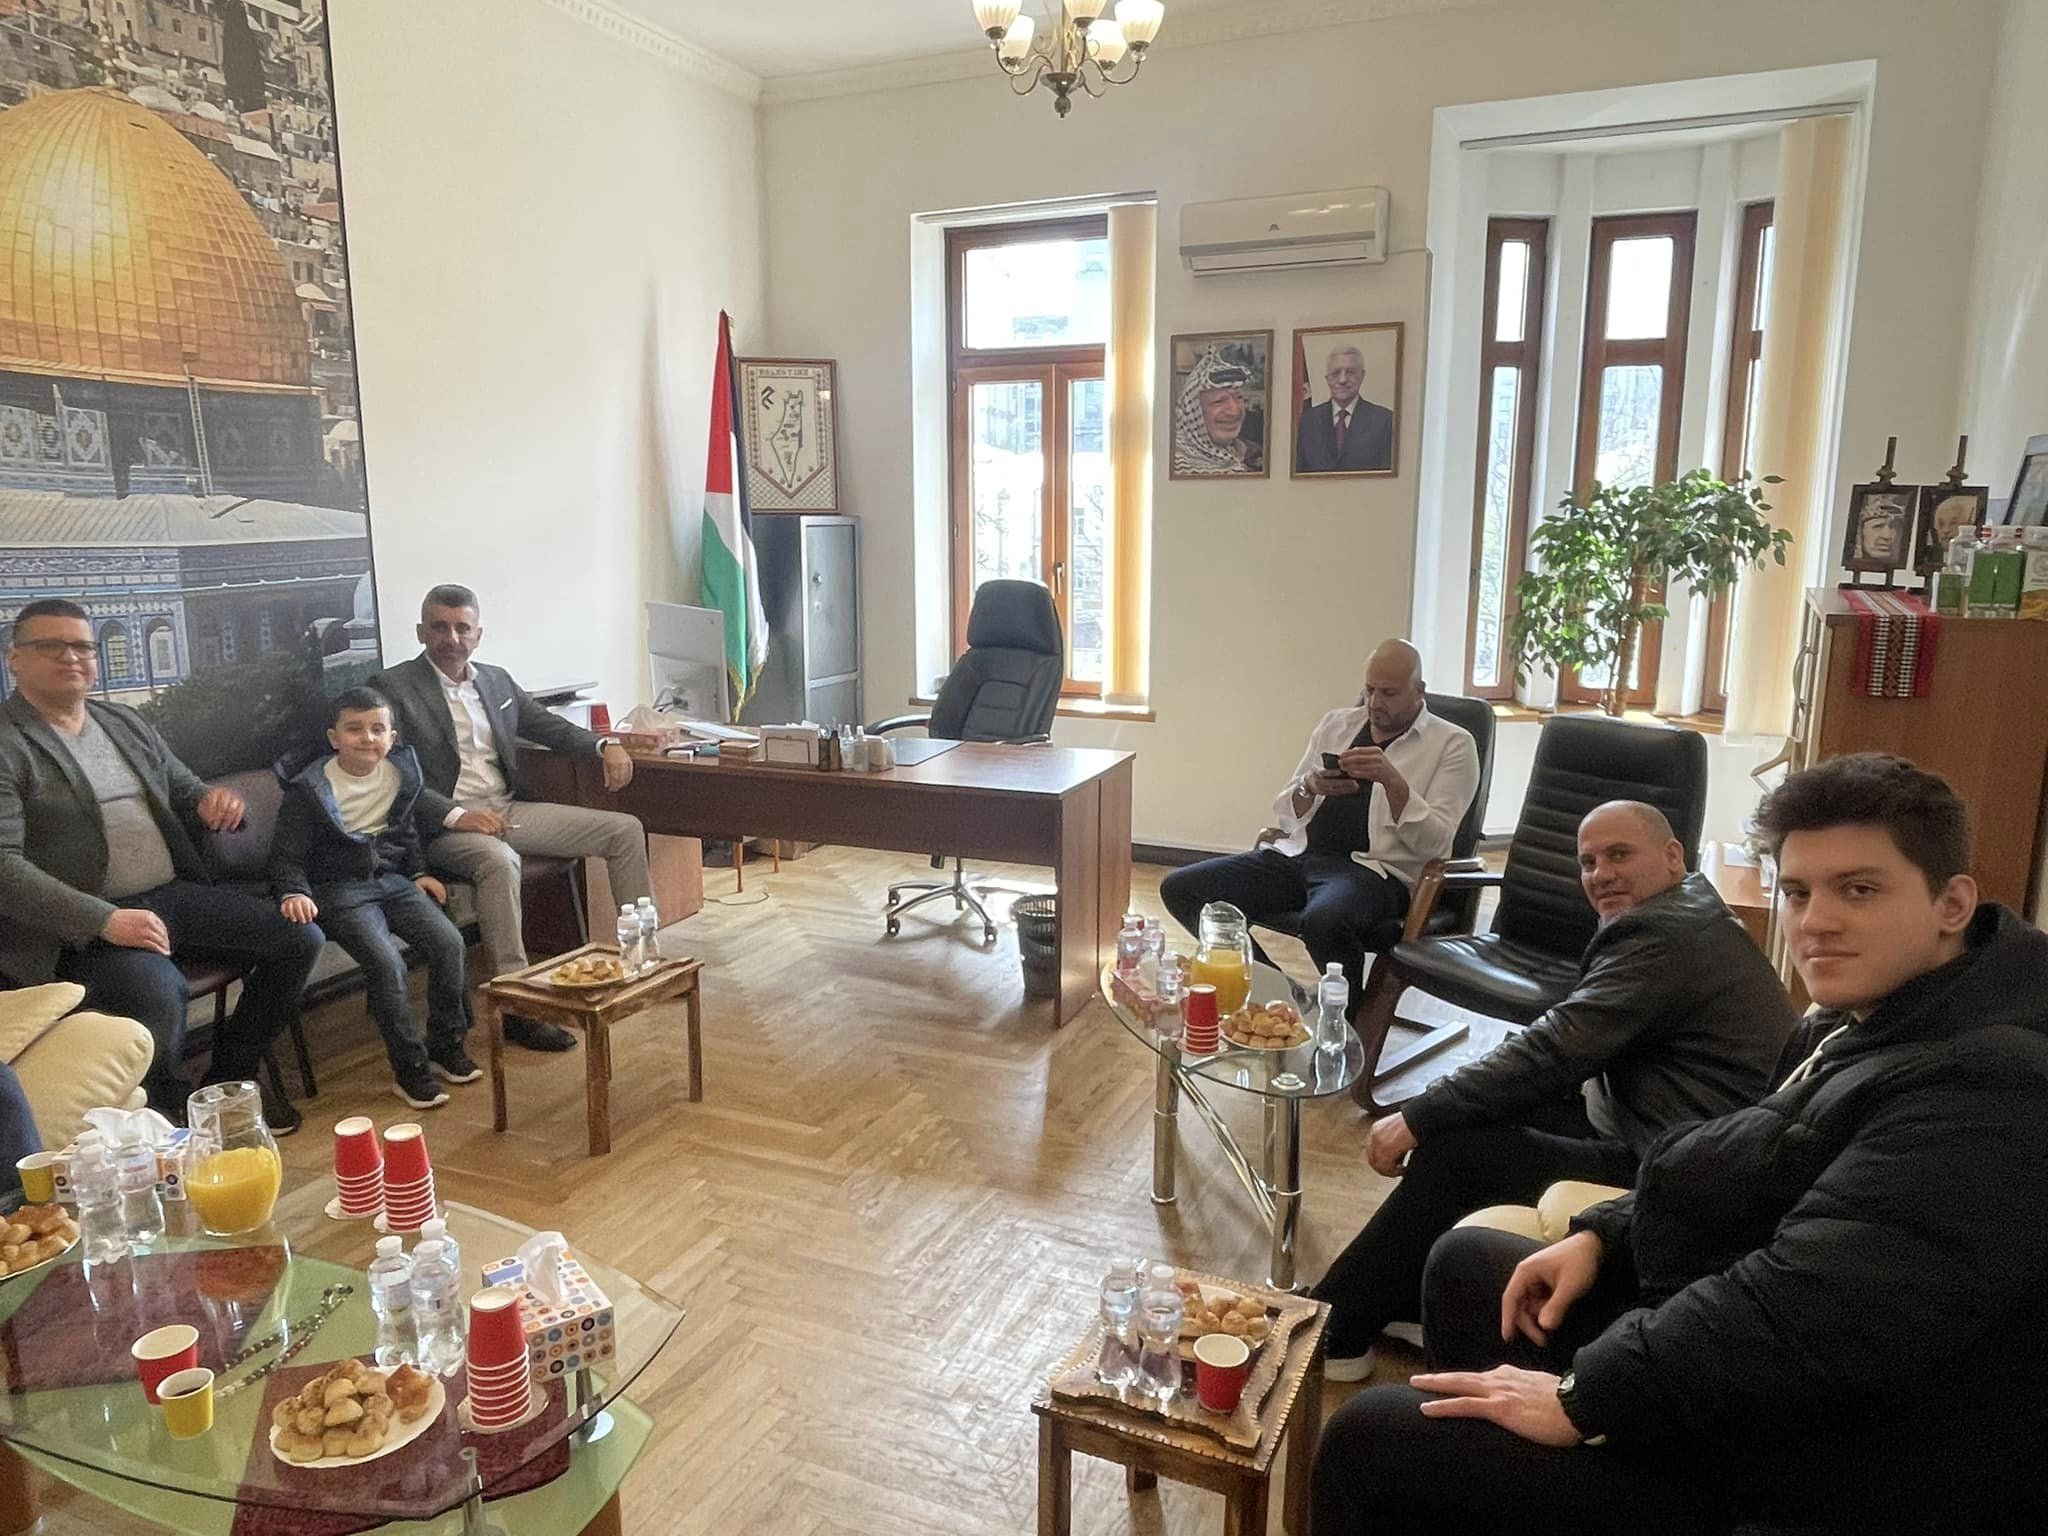 Reception of the members of the Palestinian community at the Embassy of Palestine in Ukraine on the occasion of Eid Al-Fitr